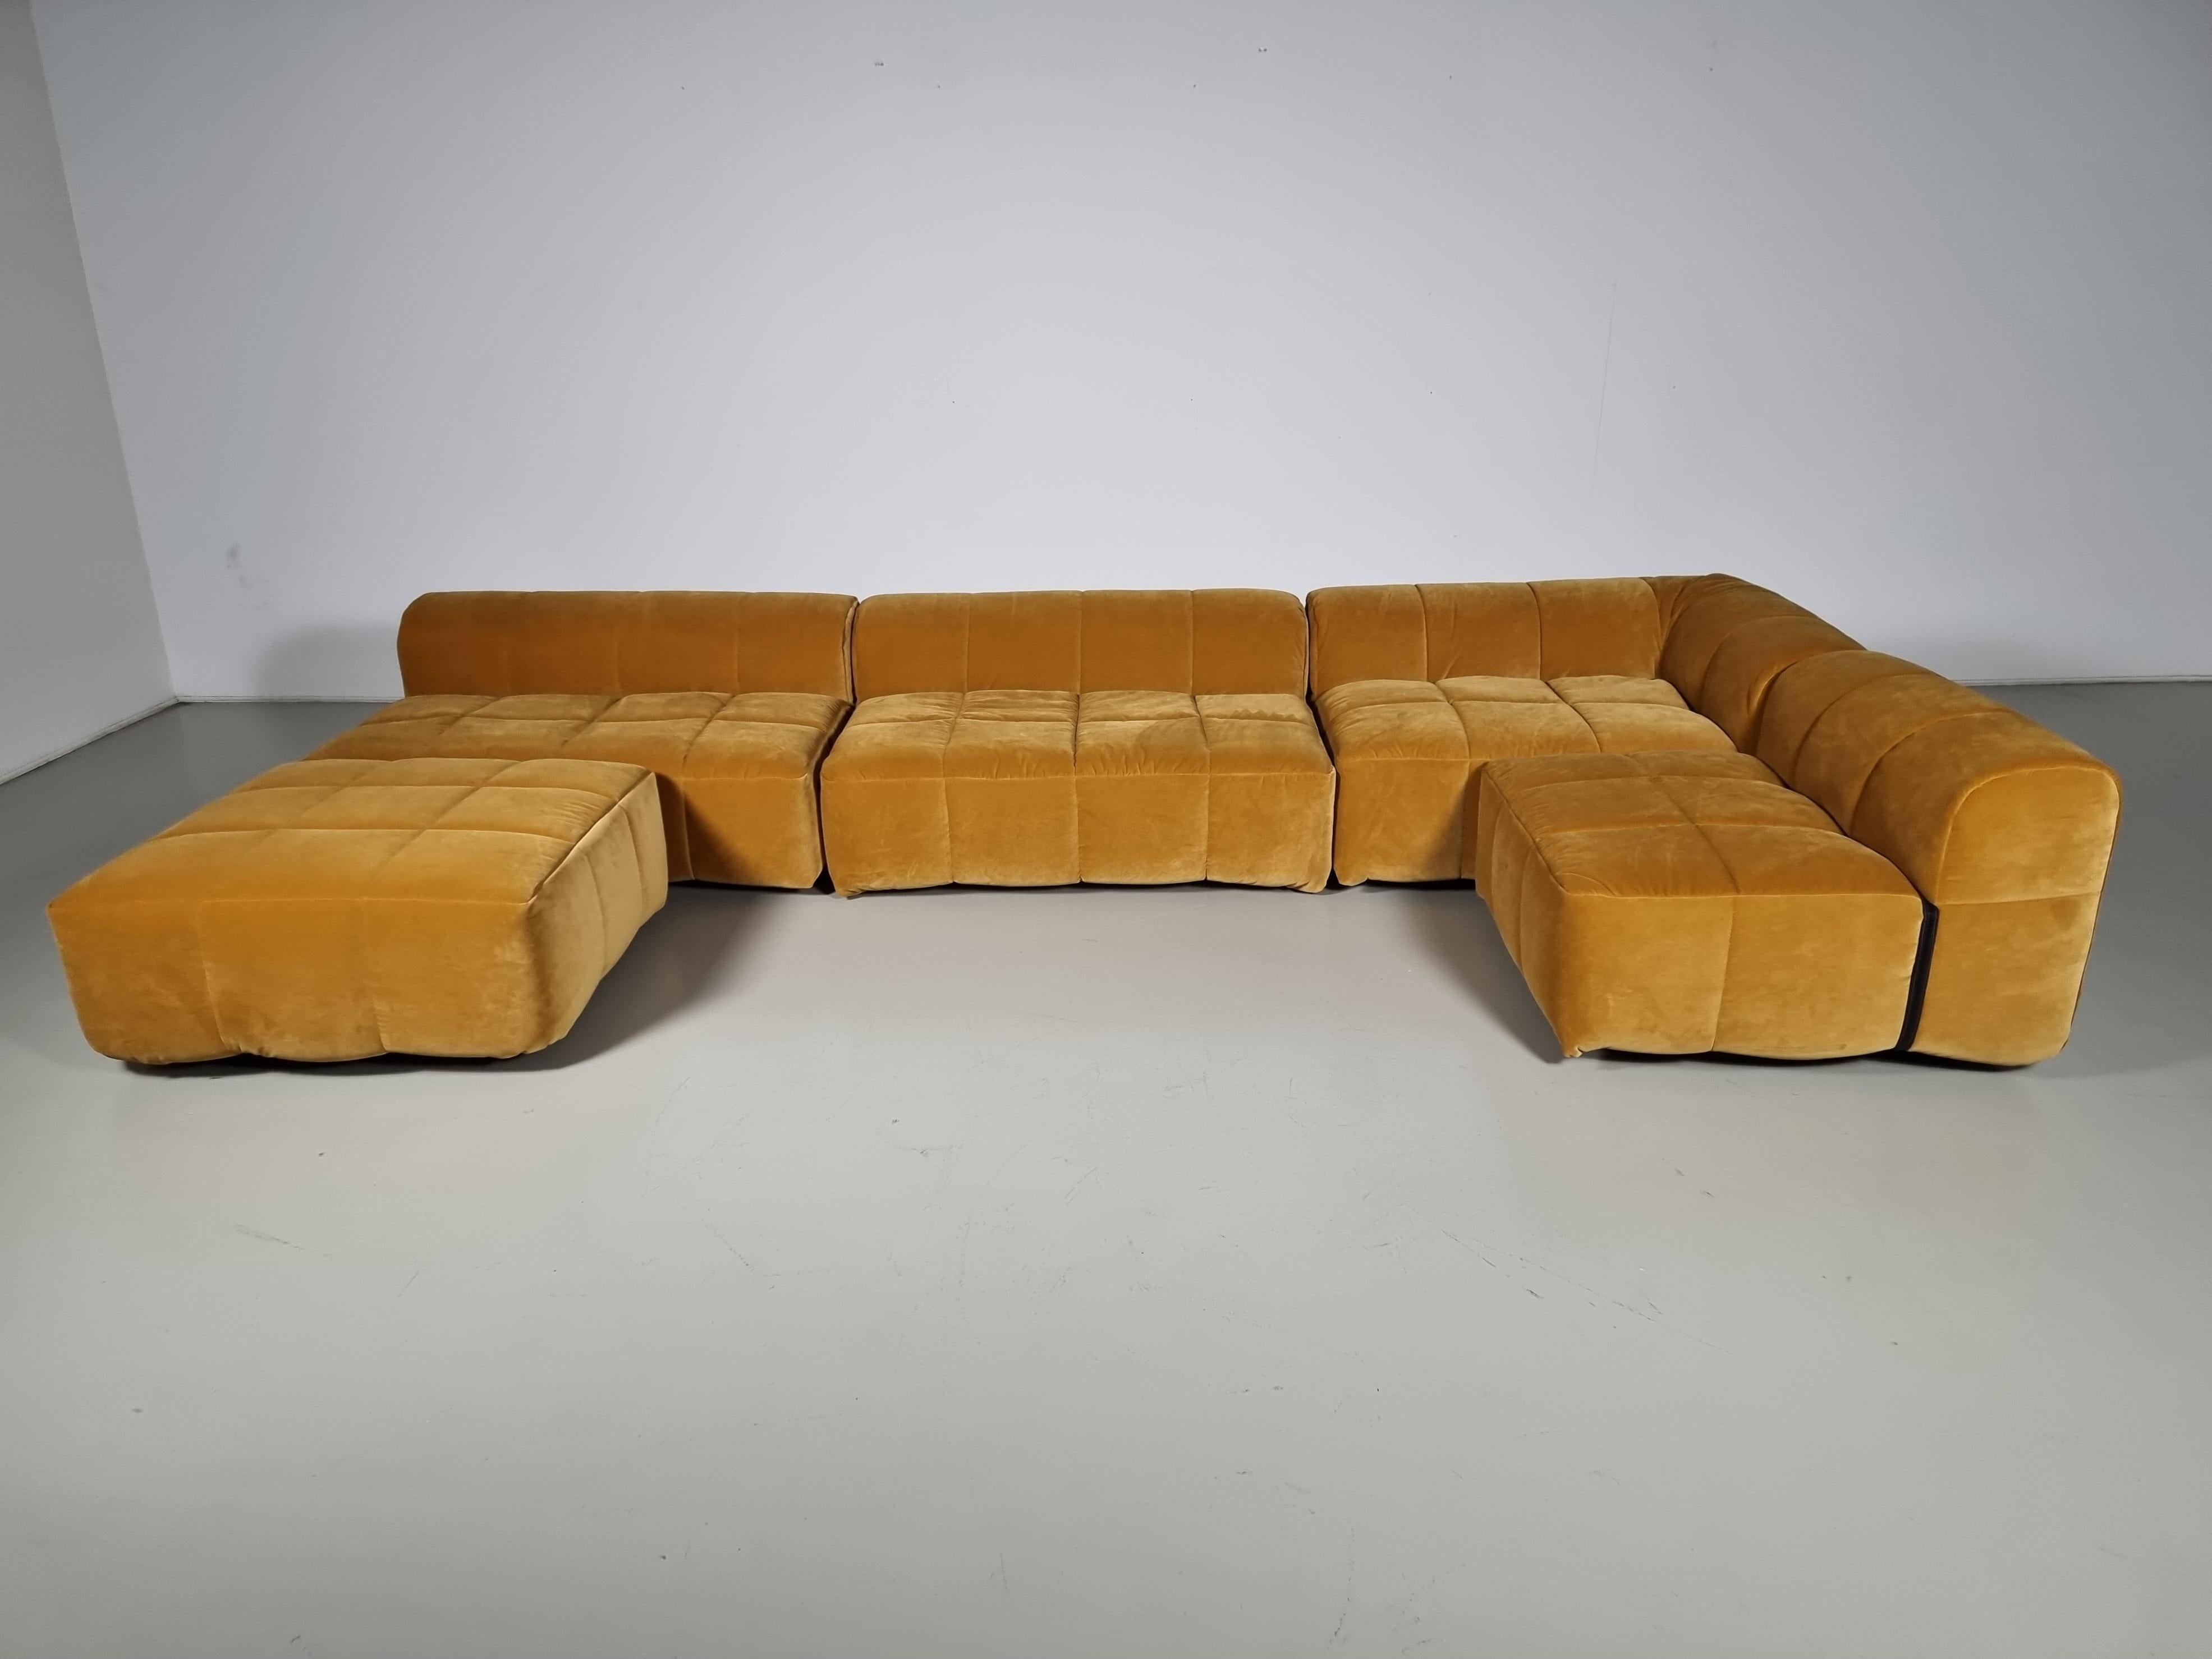 Strips sofa designed by Cini Boeri for Arflex in the late 1960s. One of the most famous products of Arflex. Designed in 1968, it was awarded the price Compasso d’Oro and it is displayed in several museums around the world, like for example the